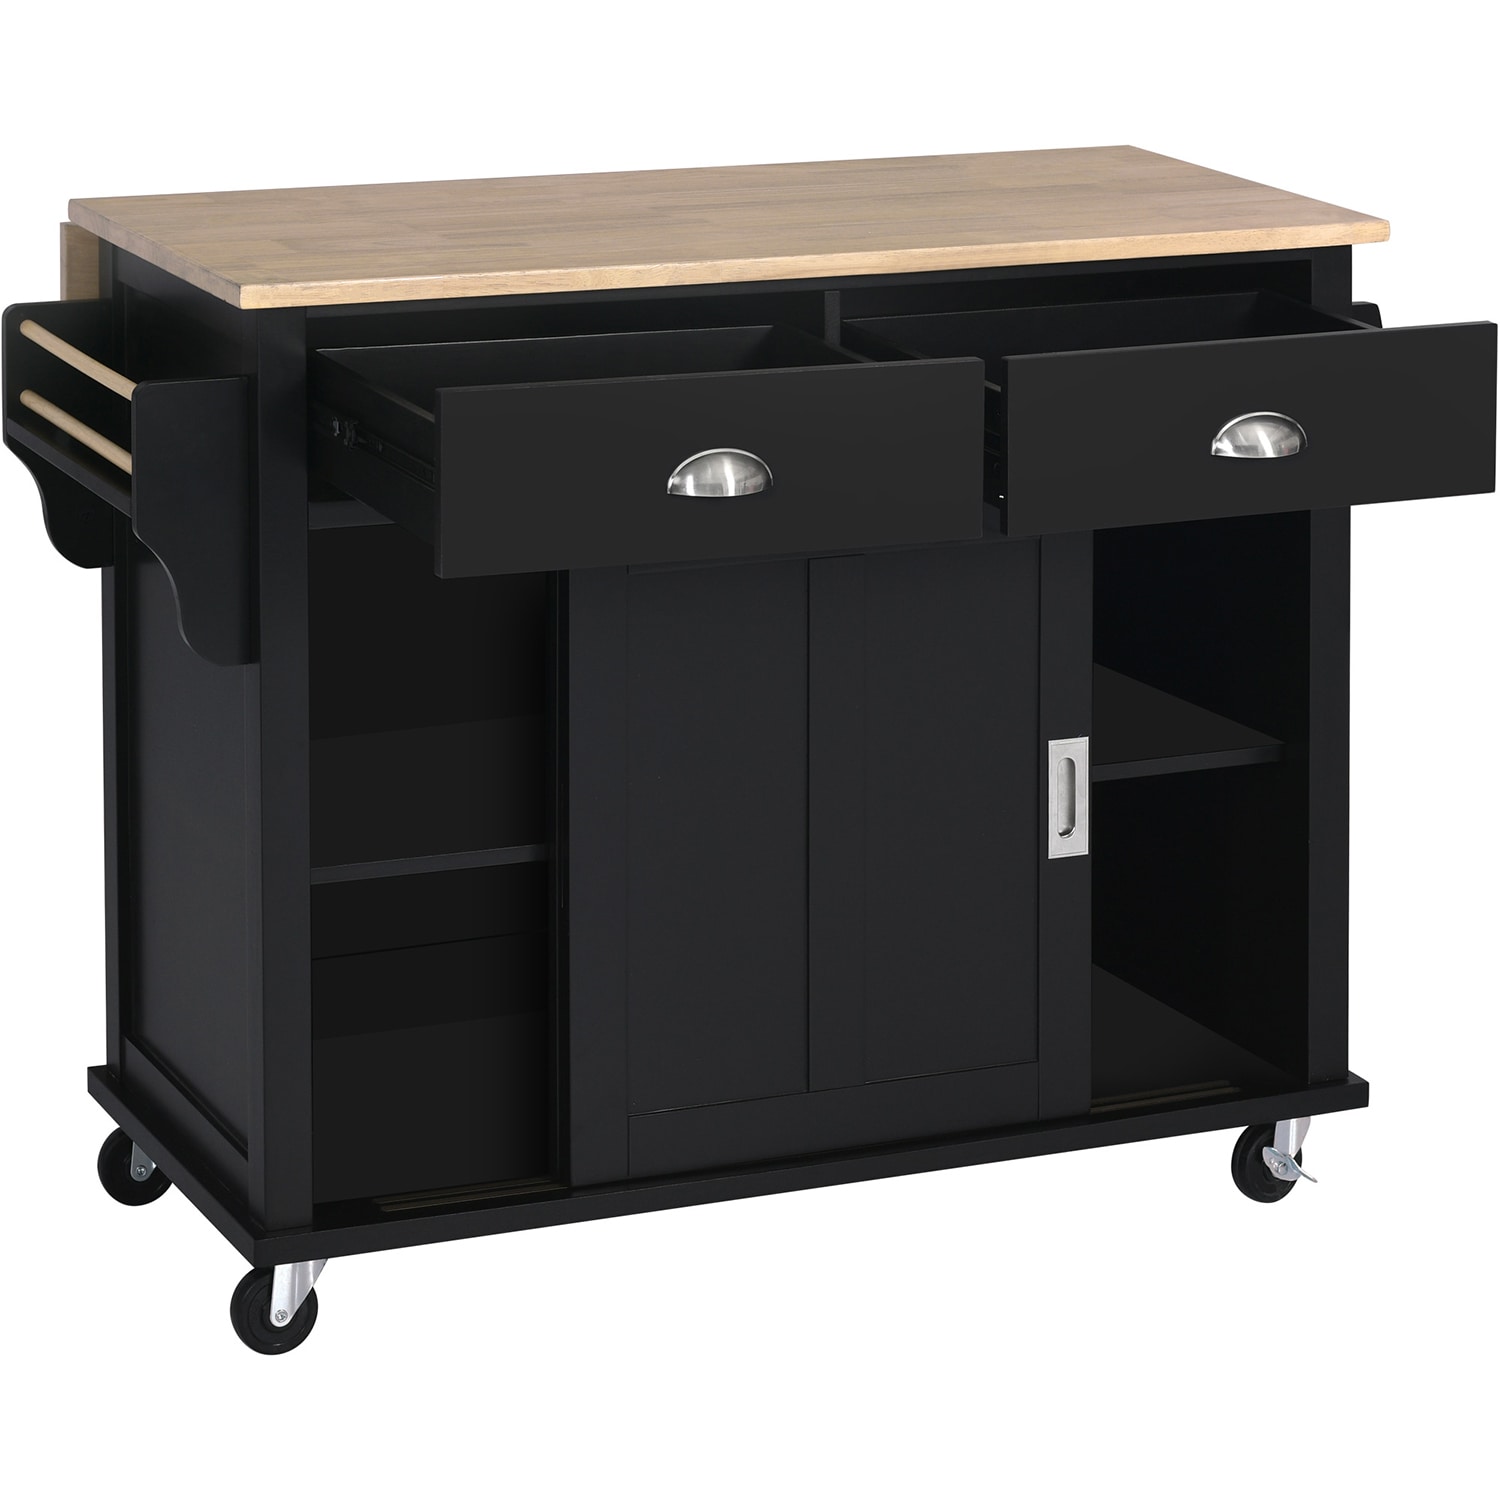 SINOFURN Black Mdf Base with Wood Top Kitchen Cart (30.5-in x 52.2-in x ...